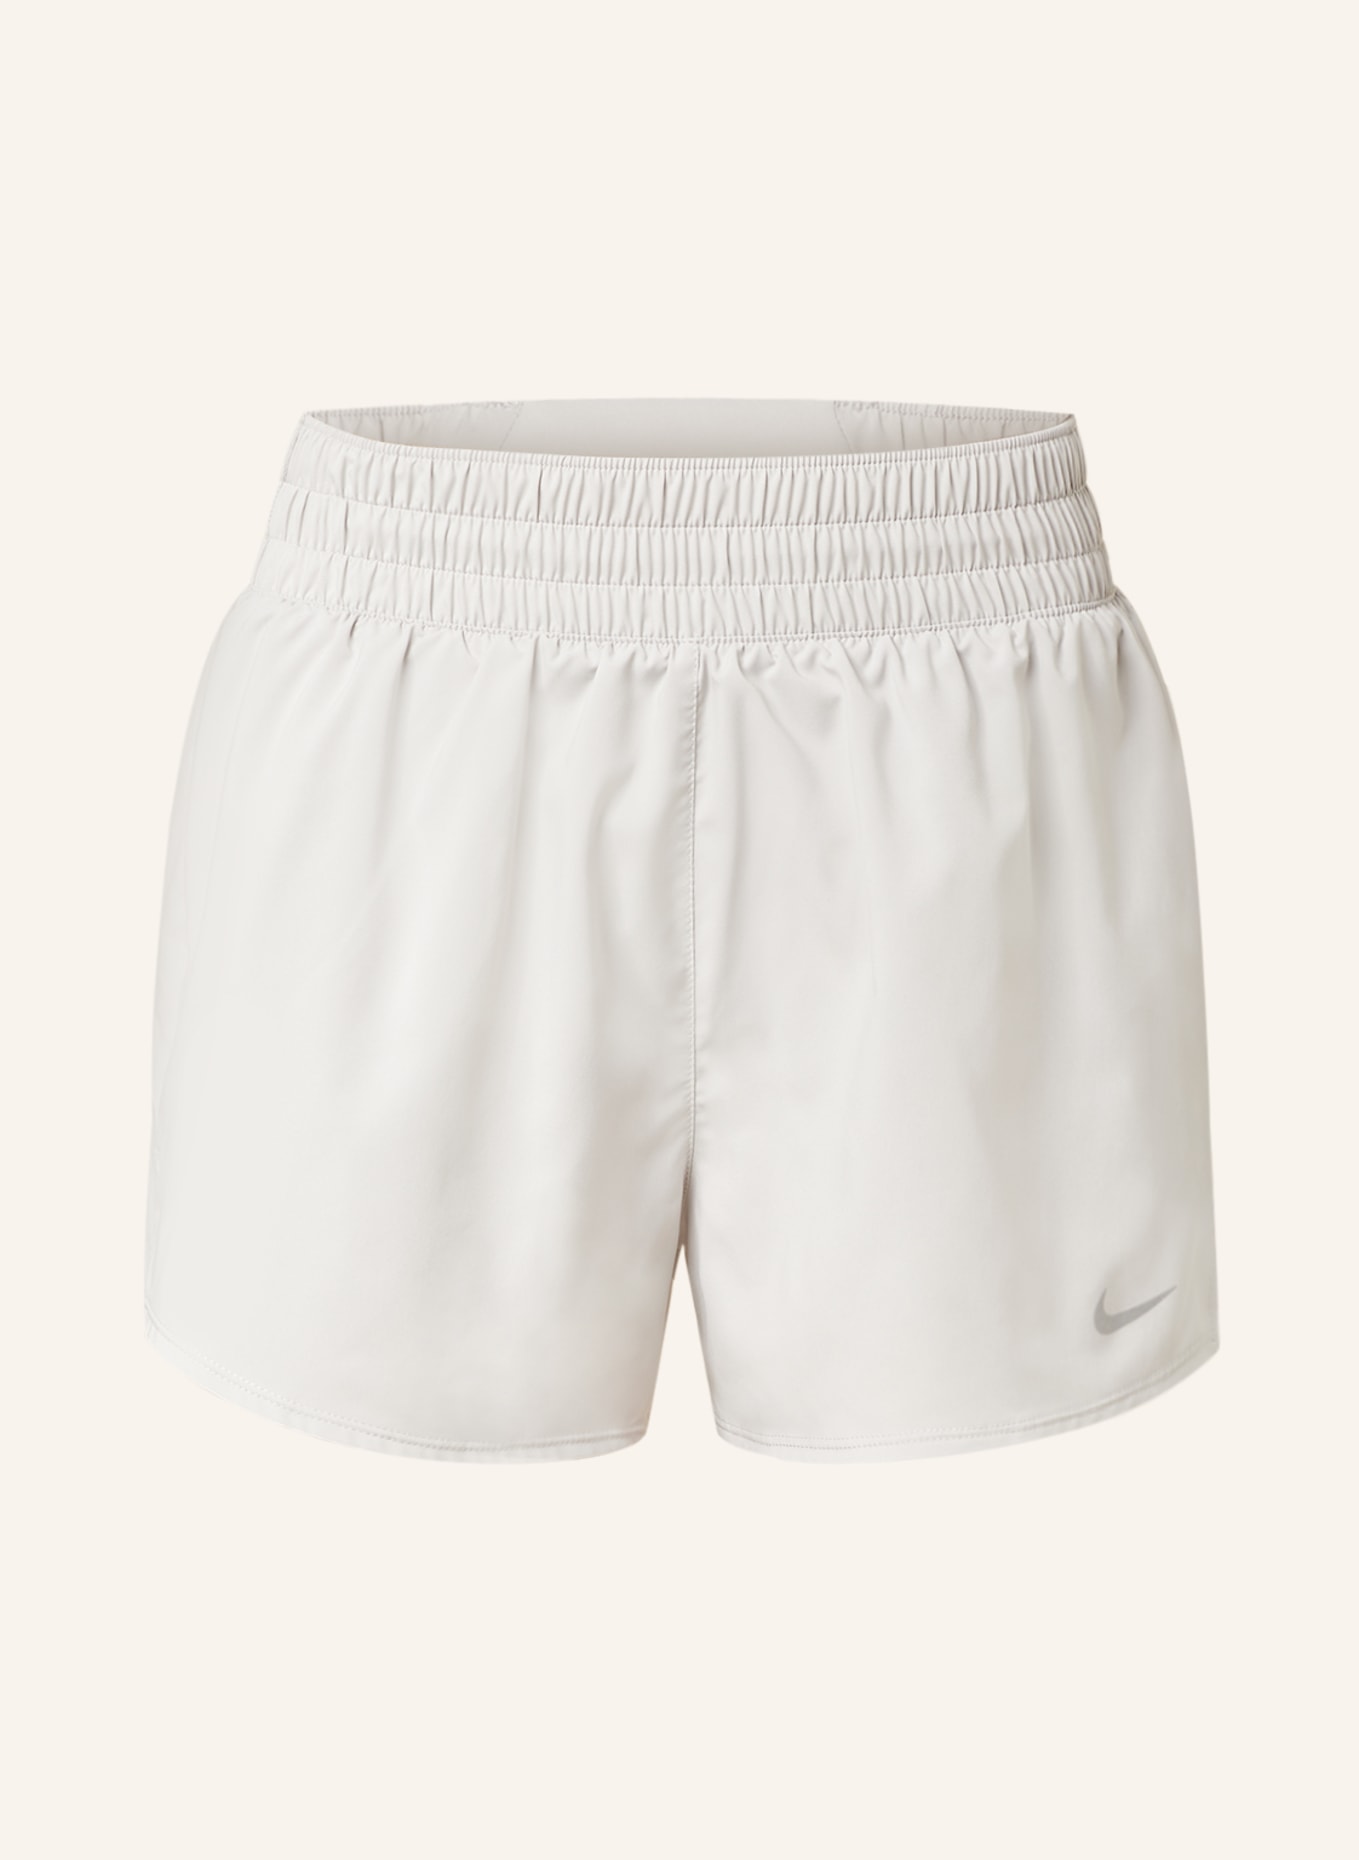 Nike 2-in-1 training shorts DRI-FIT ONE, Color: LIGHT GRAY (Image 1)